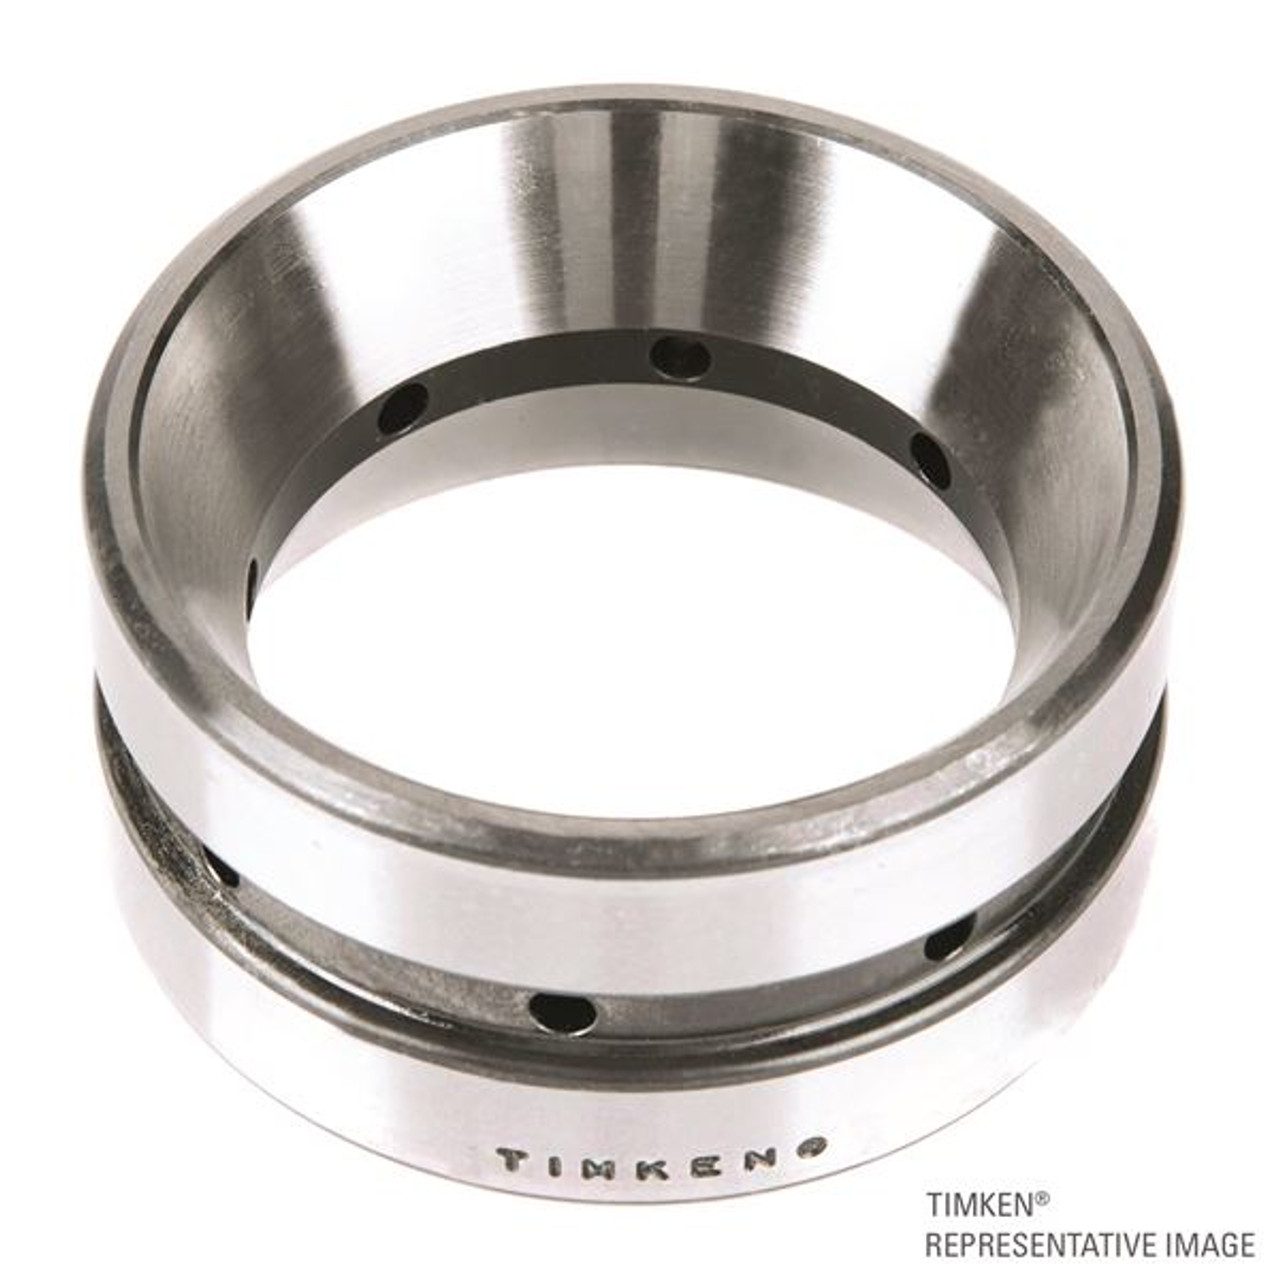 Timken® Single Double Row Cup  L357010CD-2